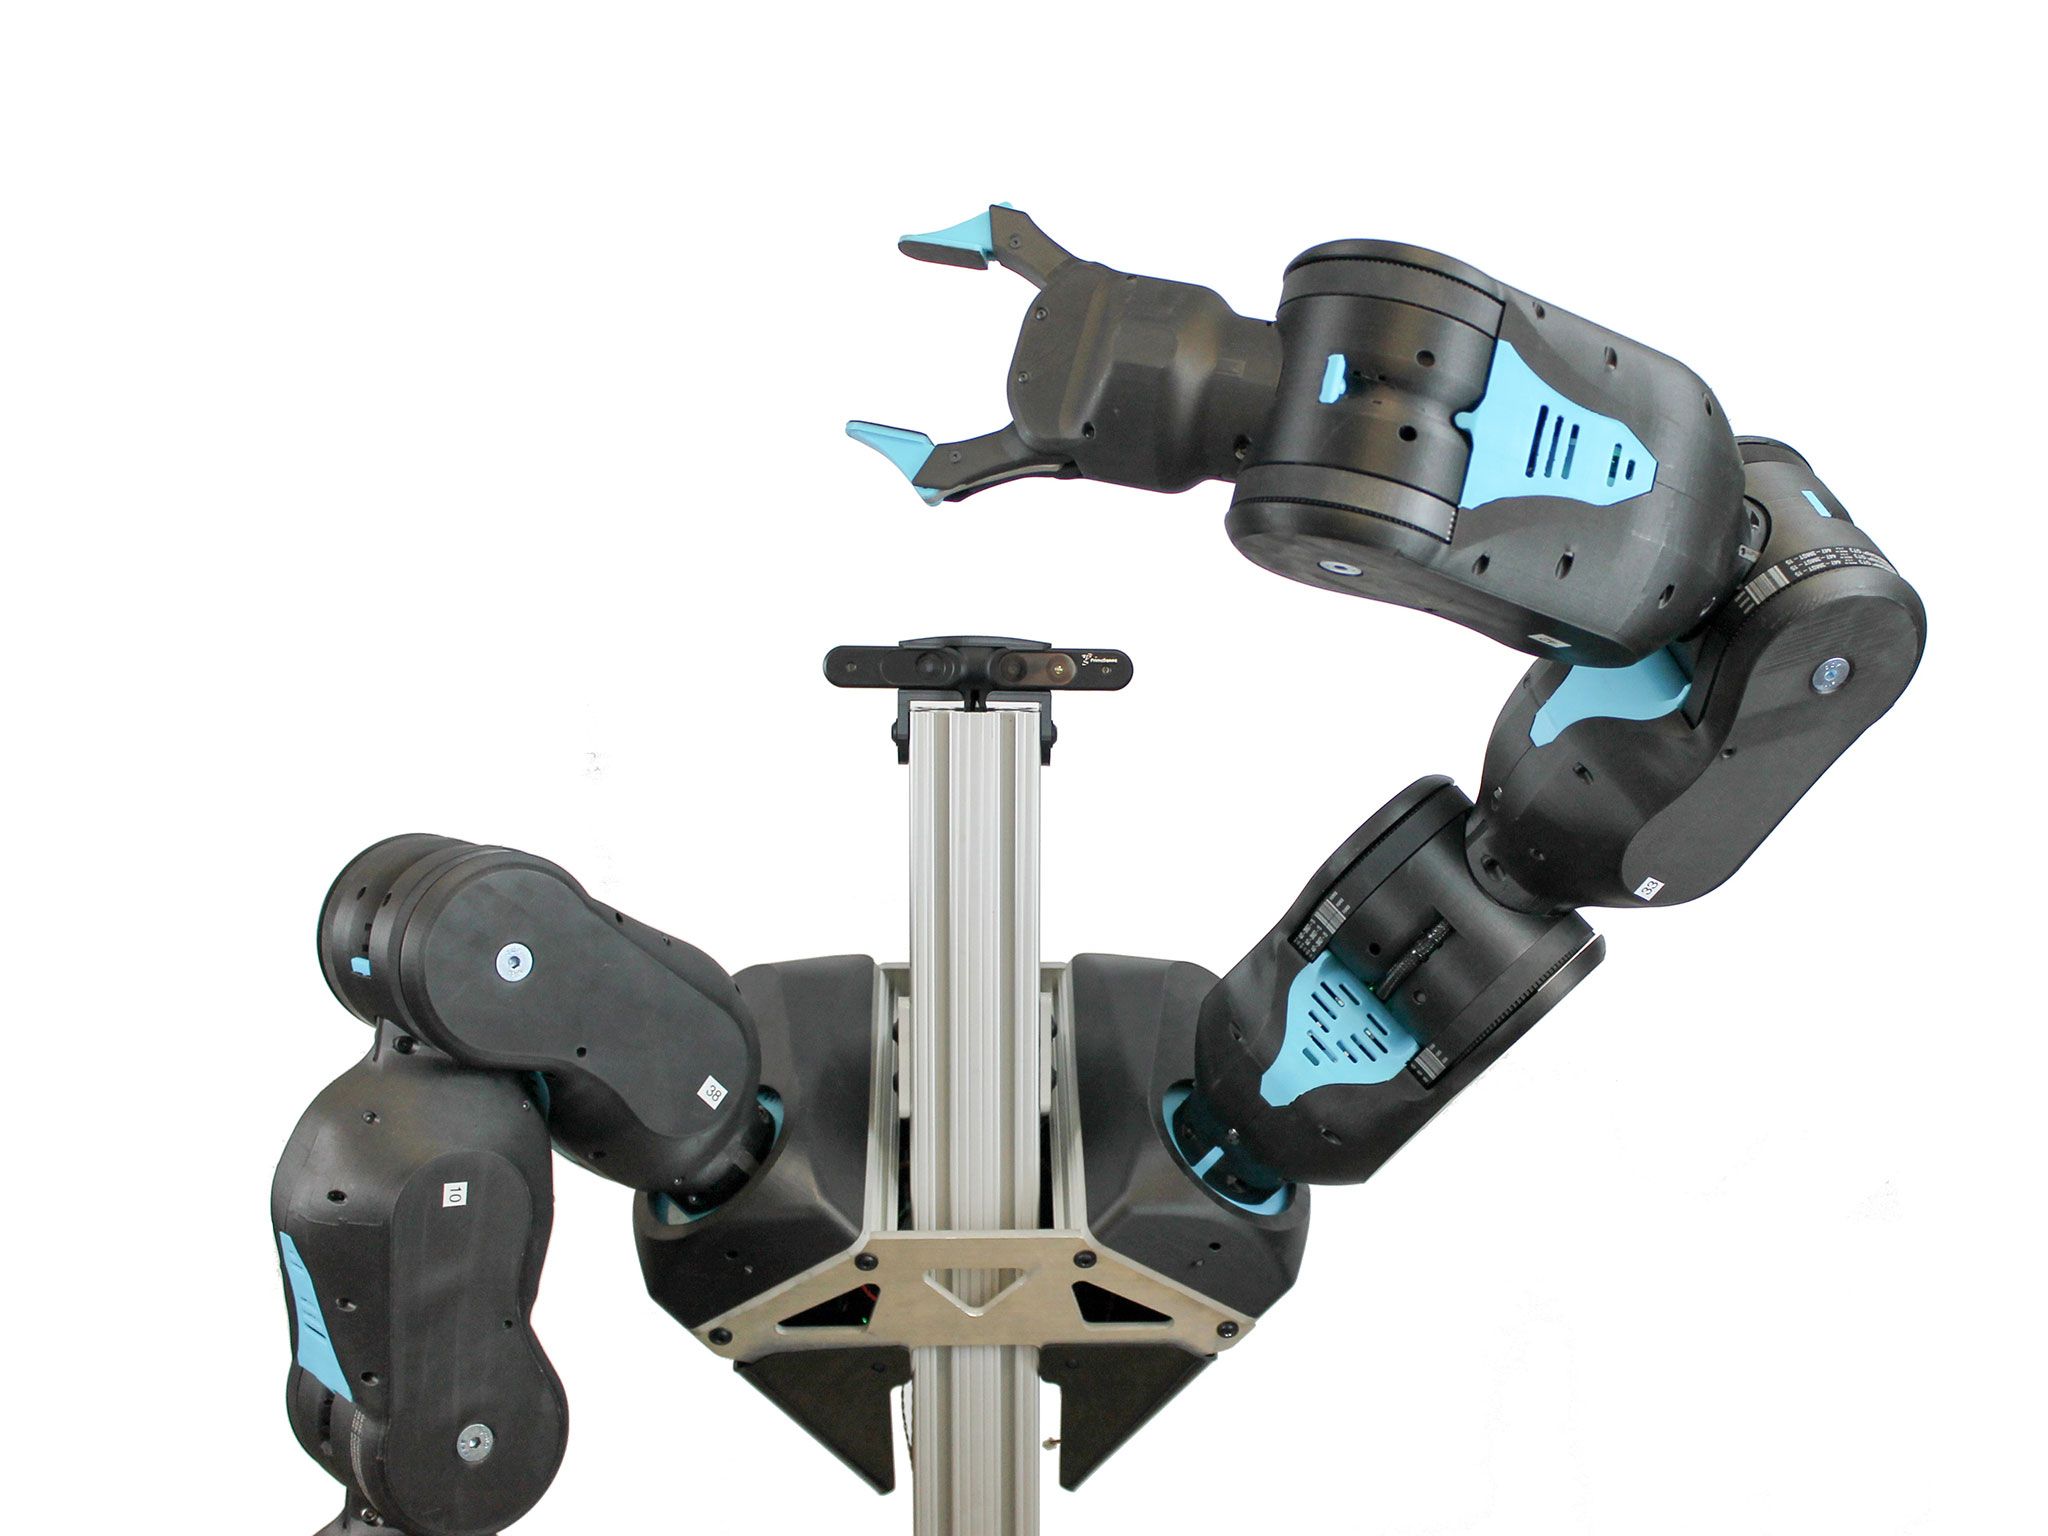 Soft Robotic Gripper Manipulates Objects Without Training - Tech Briefs